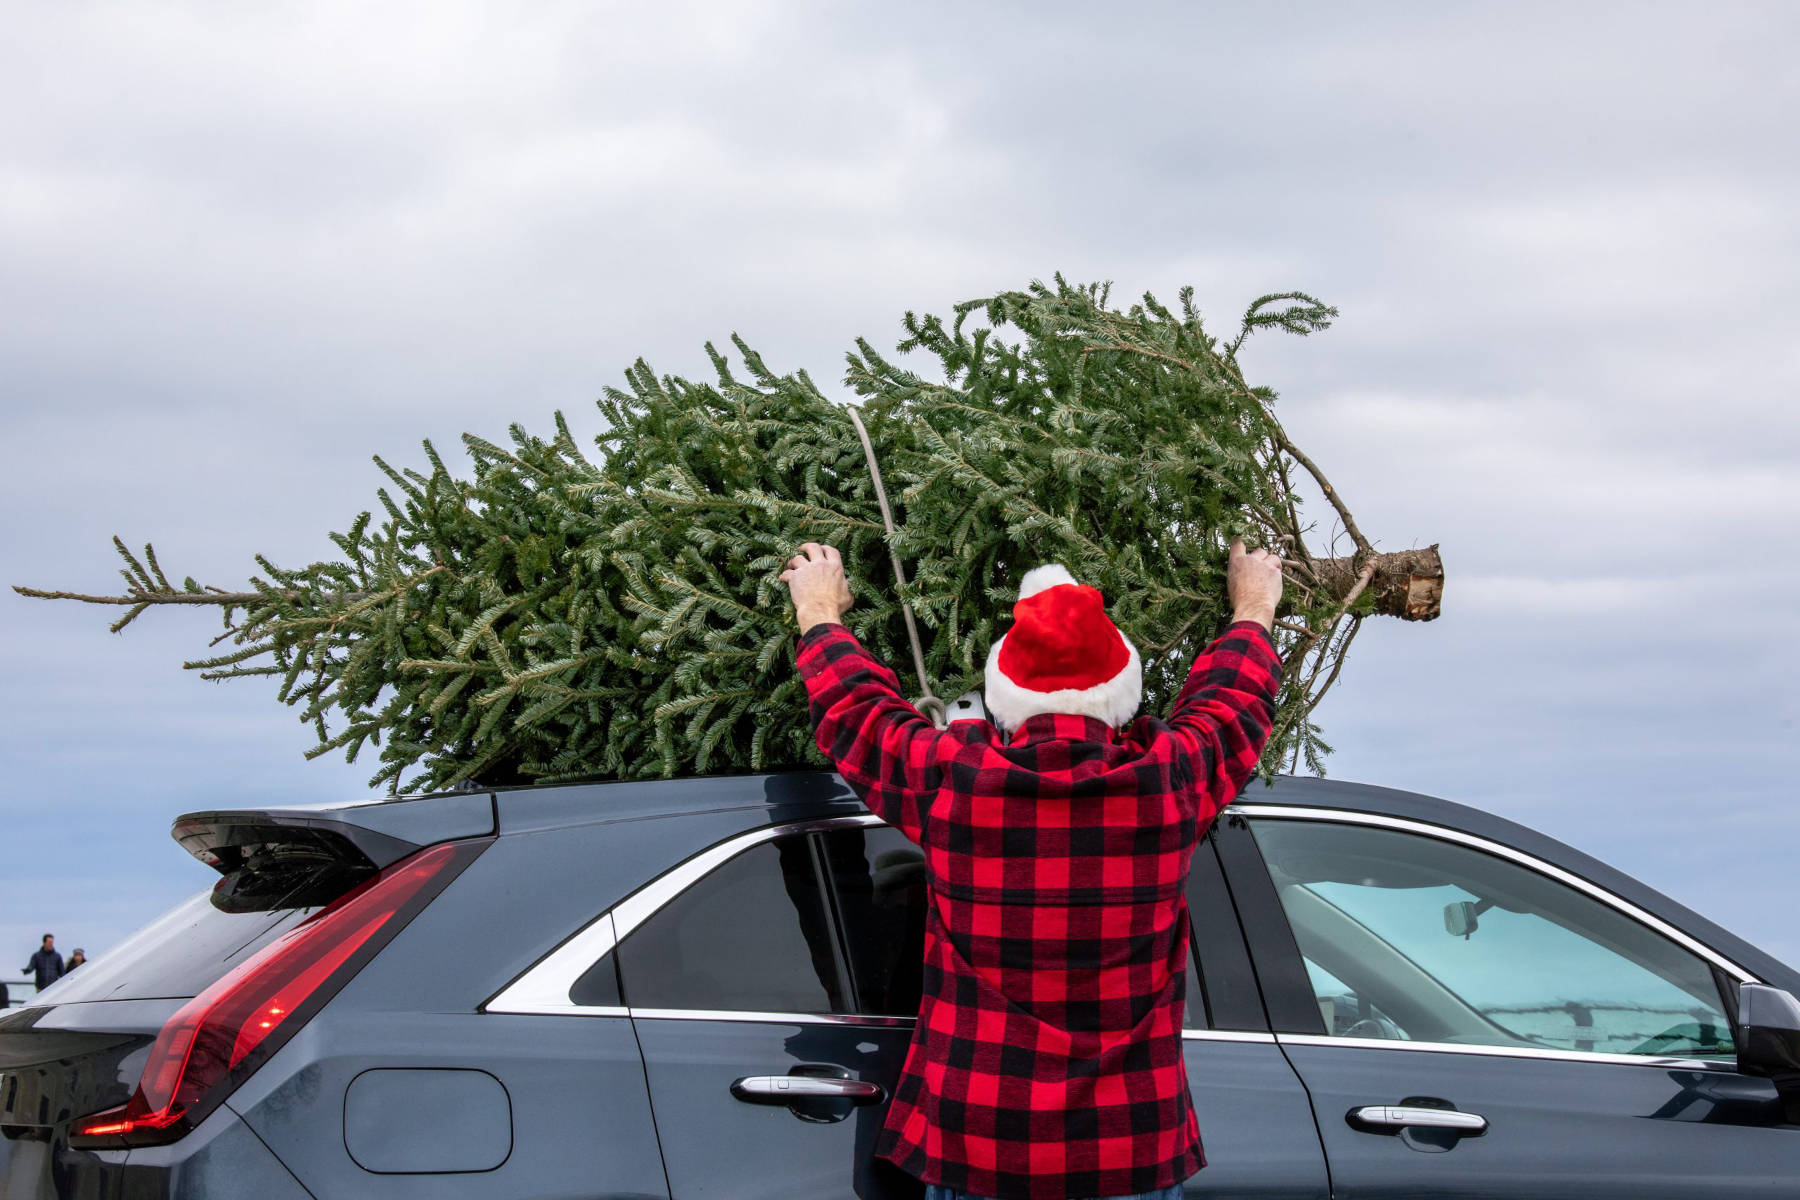 Top 5 Auto Repair Services to Get Your Car Ready for the Holidays